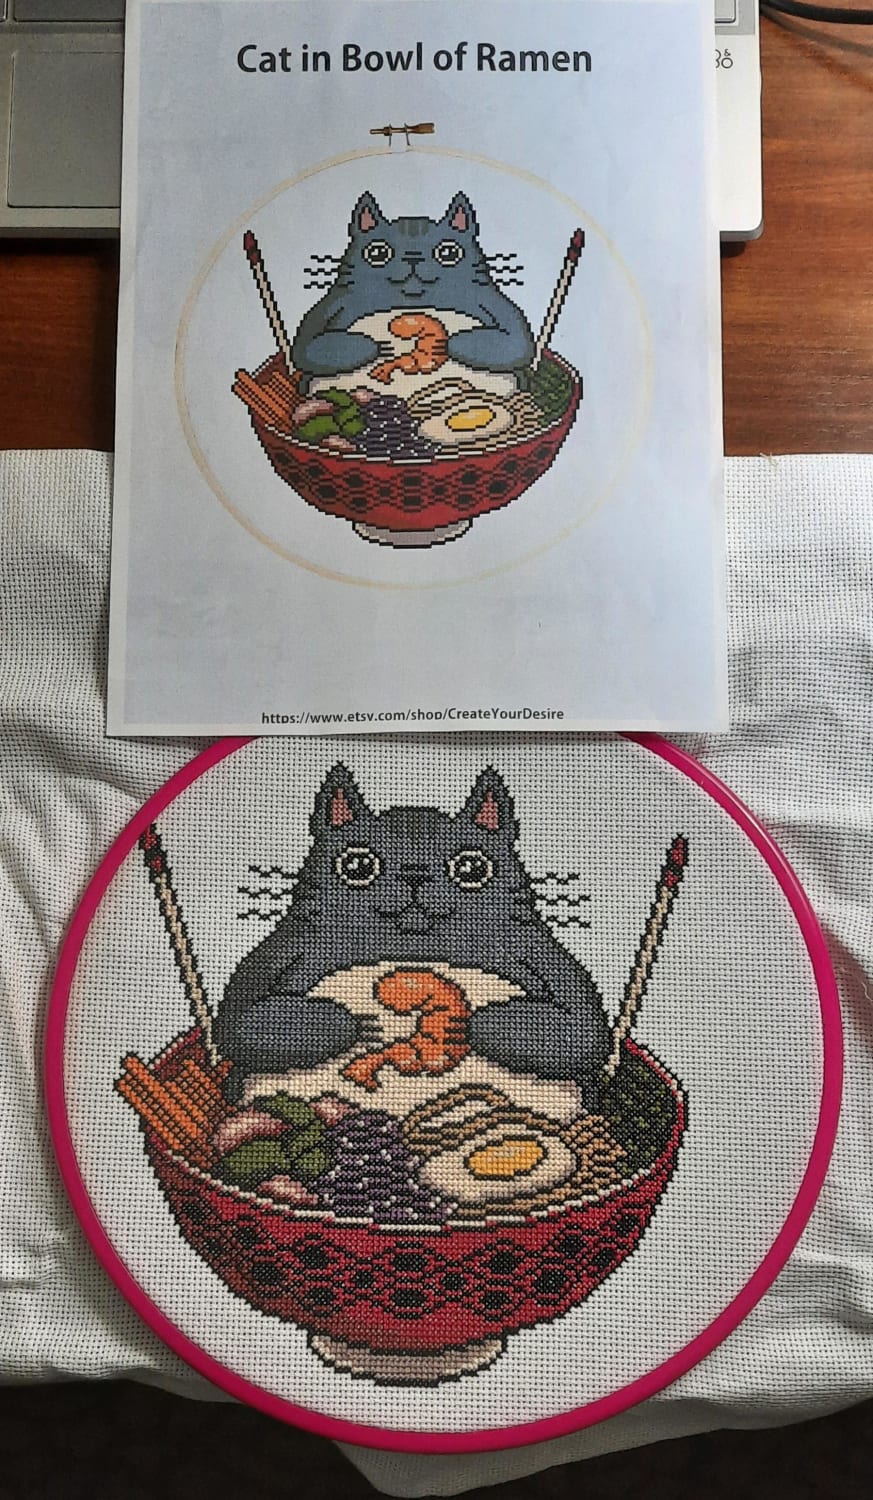 [FO] FINALLY! Now just to wash, frame, and drop it off at the NC State Fair office on Monday for entry!